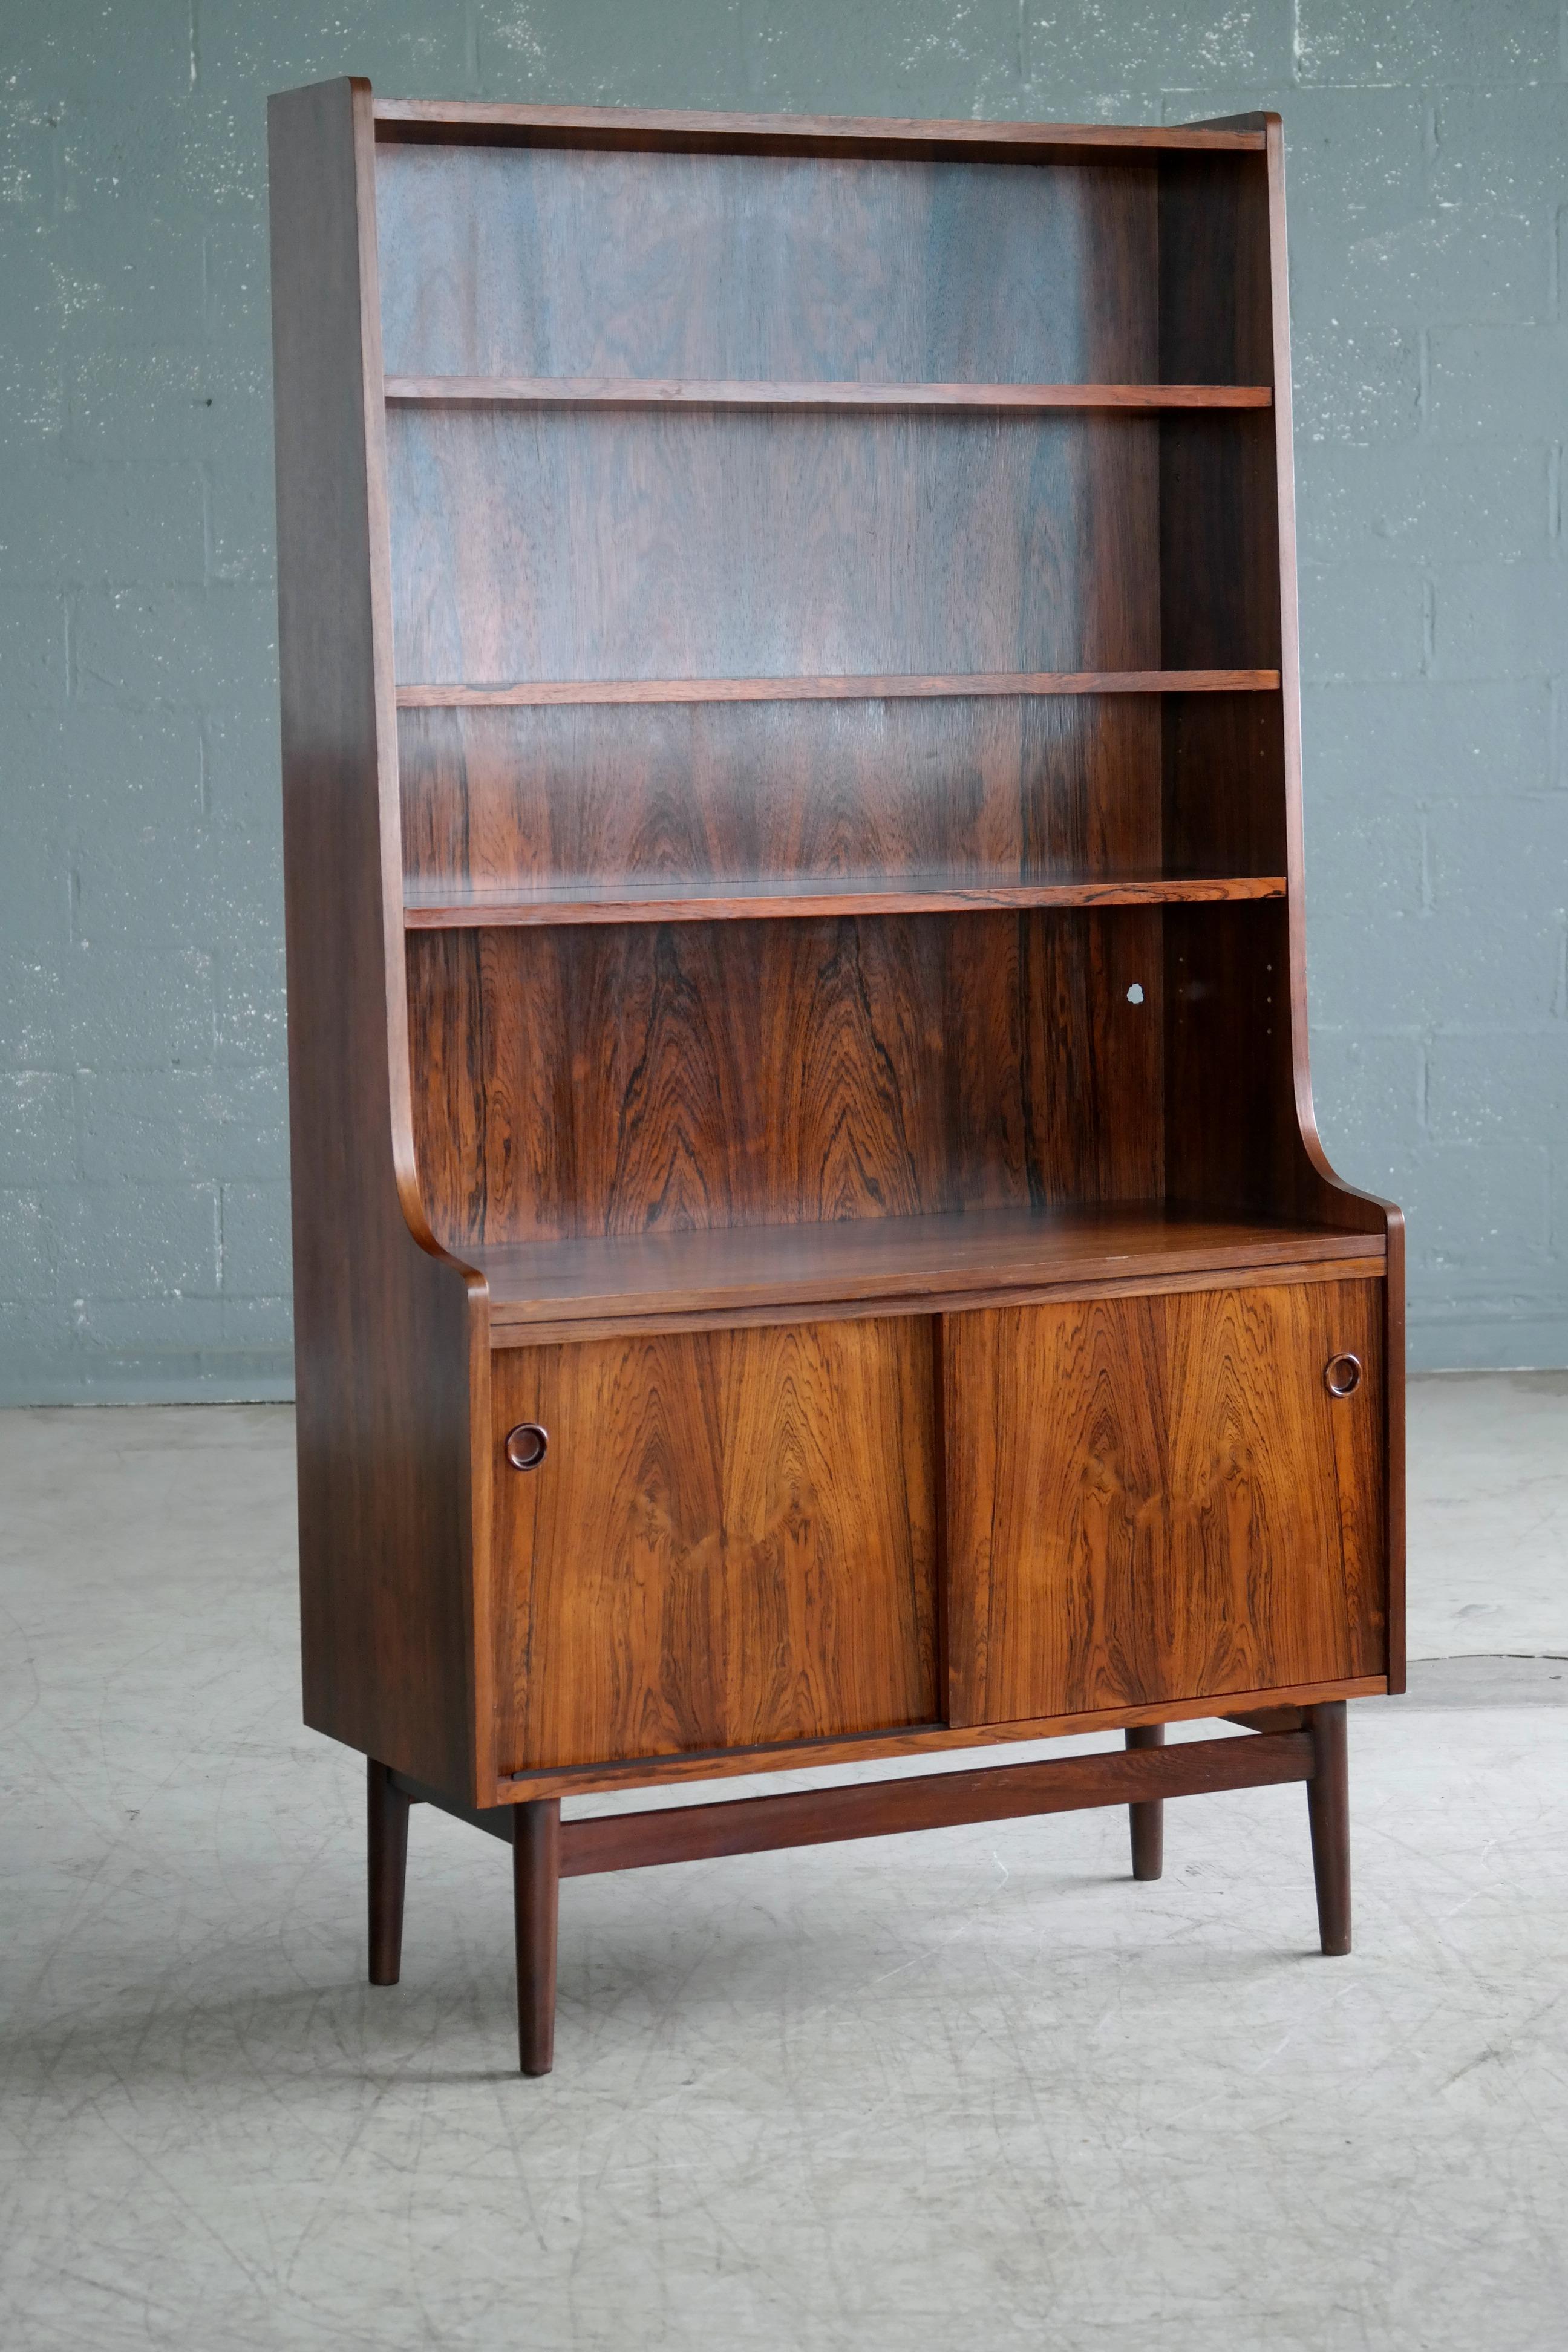 Beautiful and elegant bookcase in bookmatched rosewood with beautiful deep and dark rosewood color and rich grain. Designed by Johannes Sorth for Bornholm's Mobler also known as Nexoe Teak. Very versatile with adjustable shelves and two storage